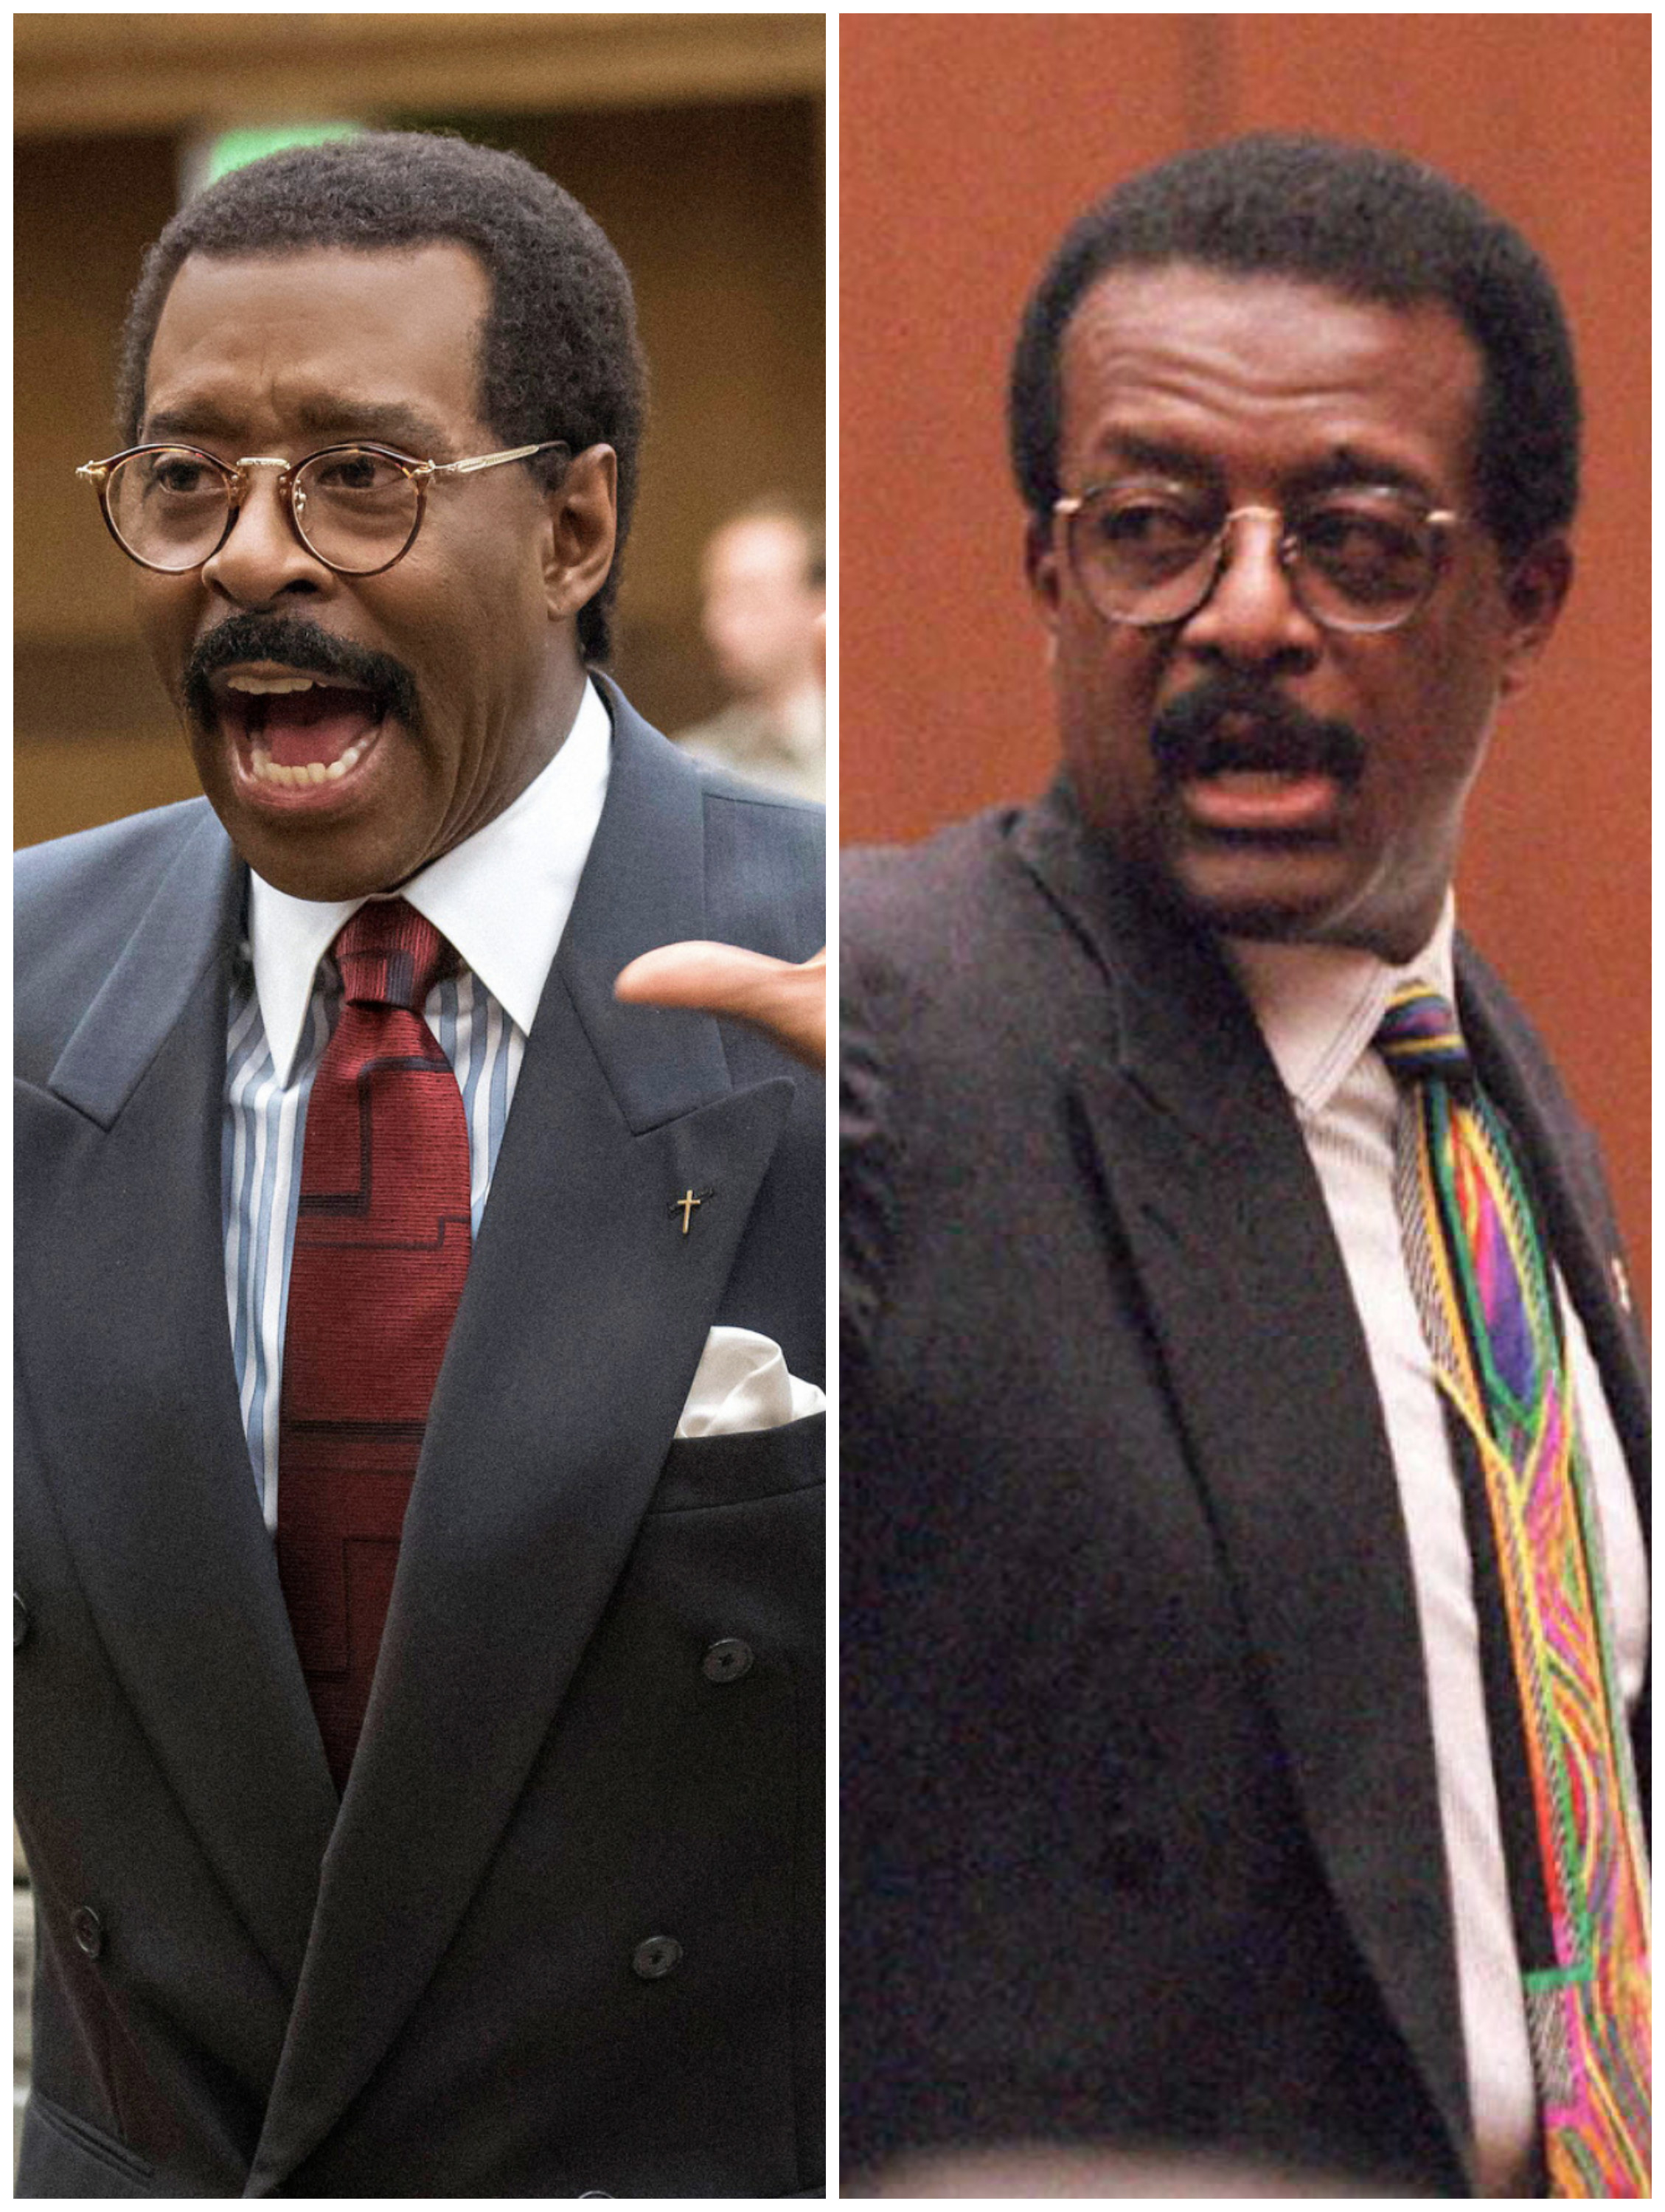 Courtney B. Vance in &quot;The People v. O. J. Simpson: American Crime Story&quot; vs. the real Johnnie Cochran